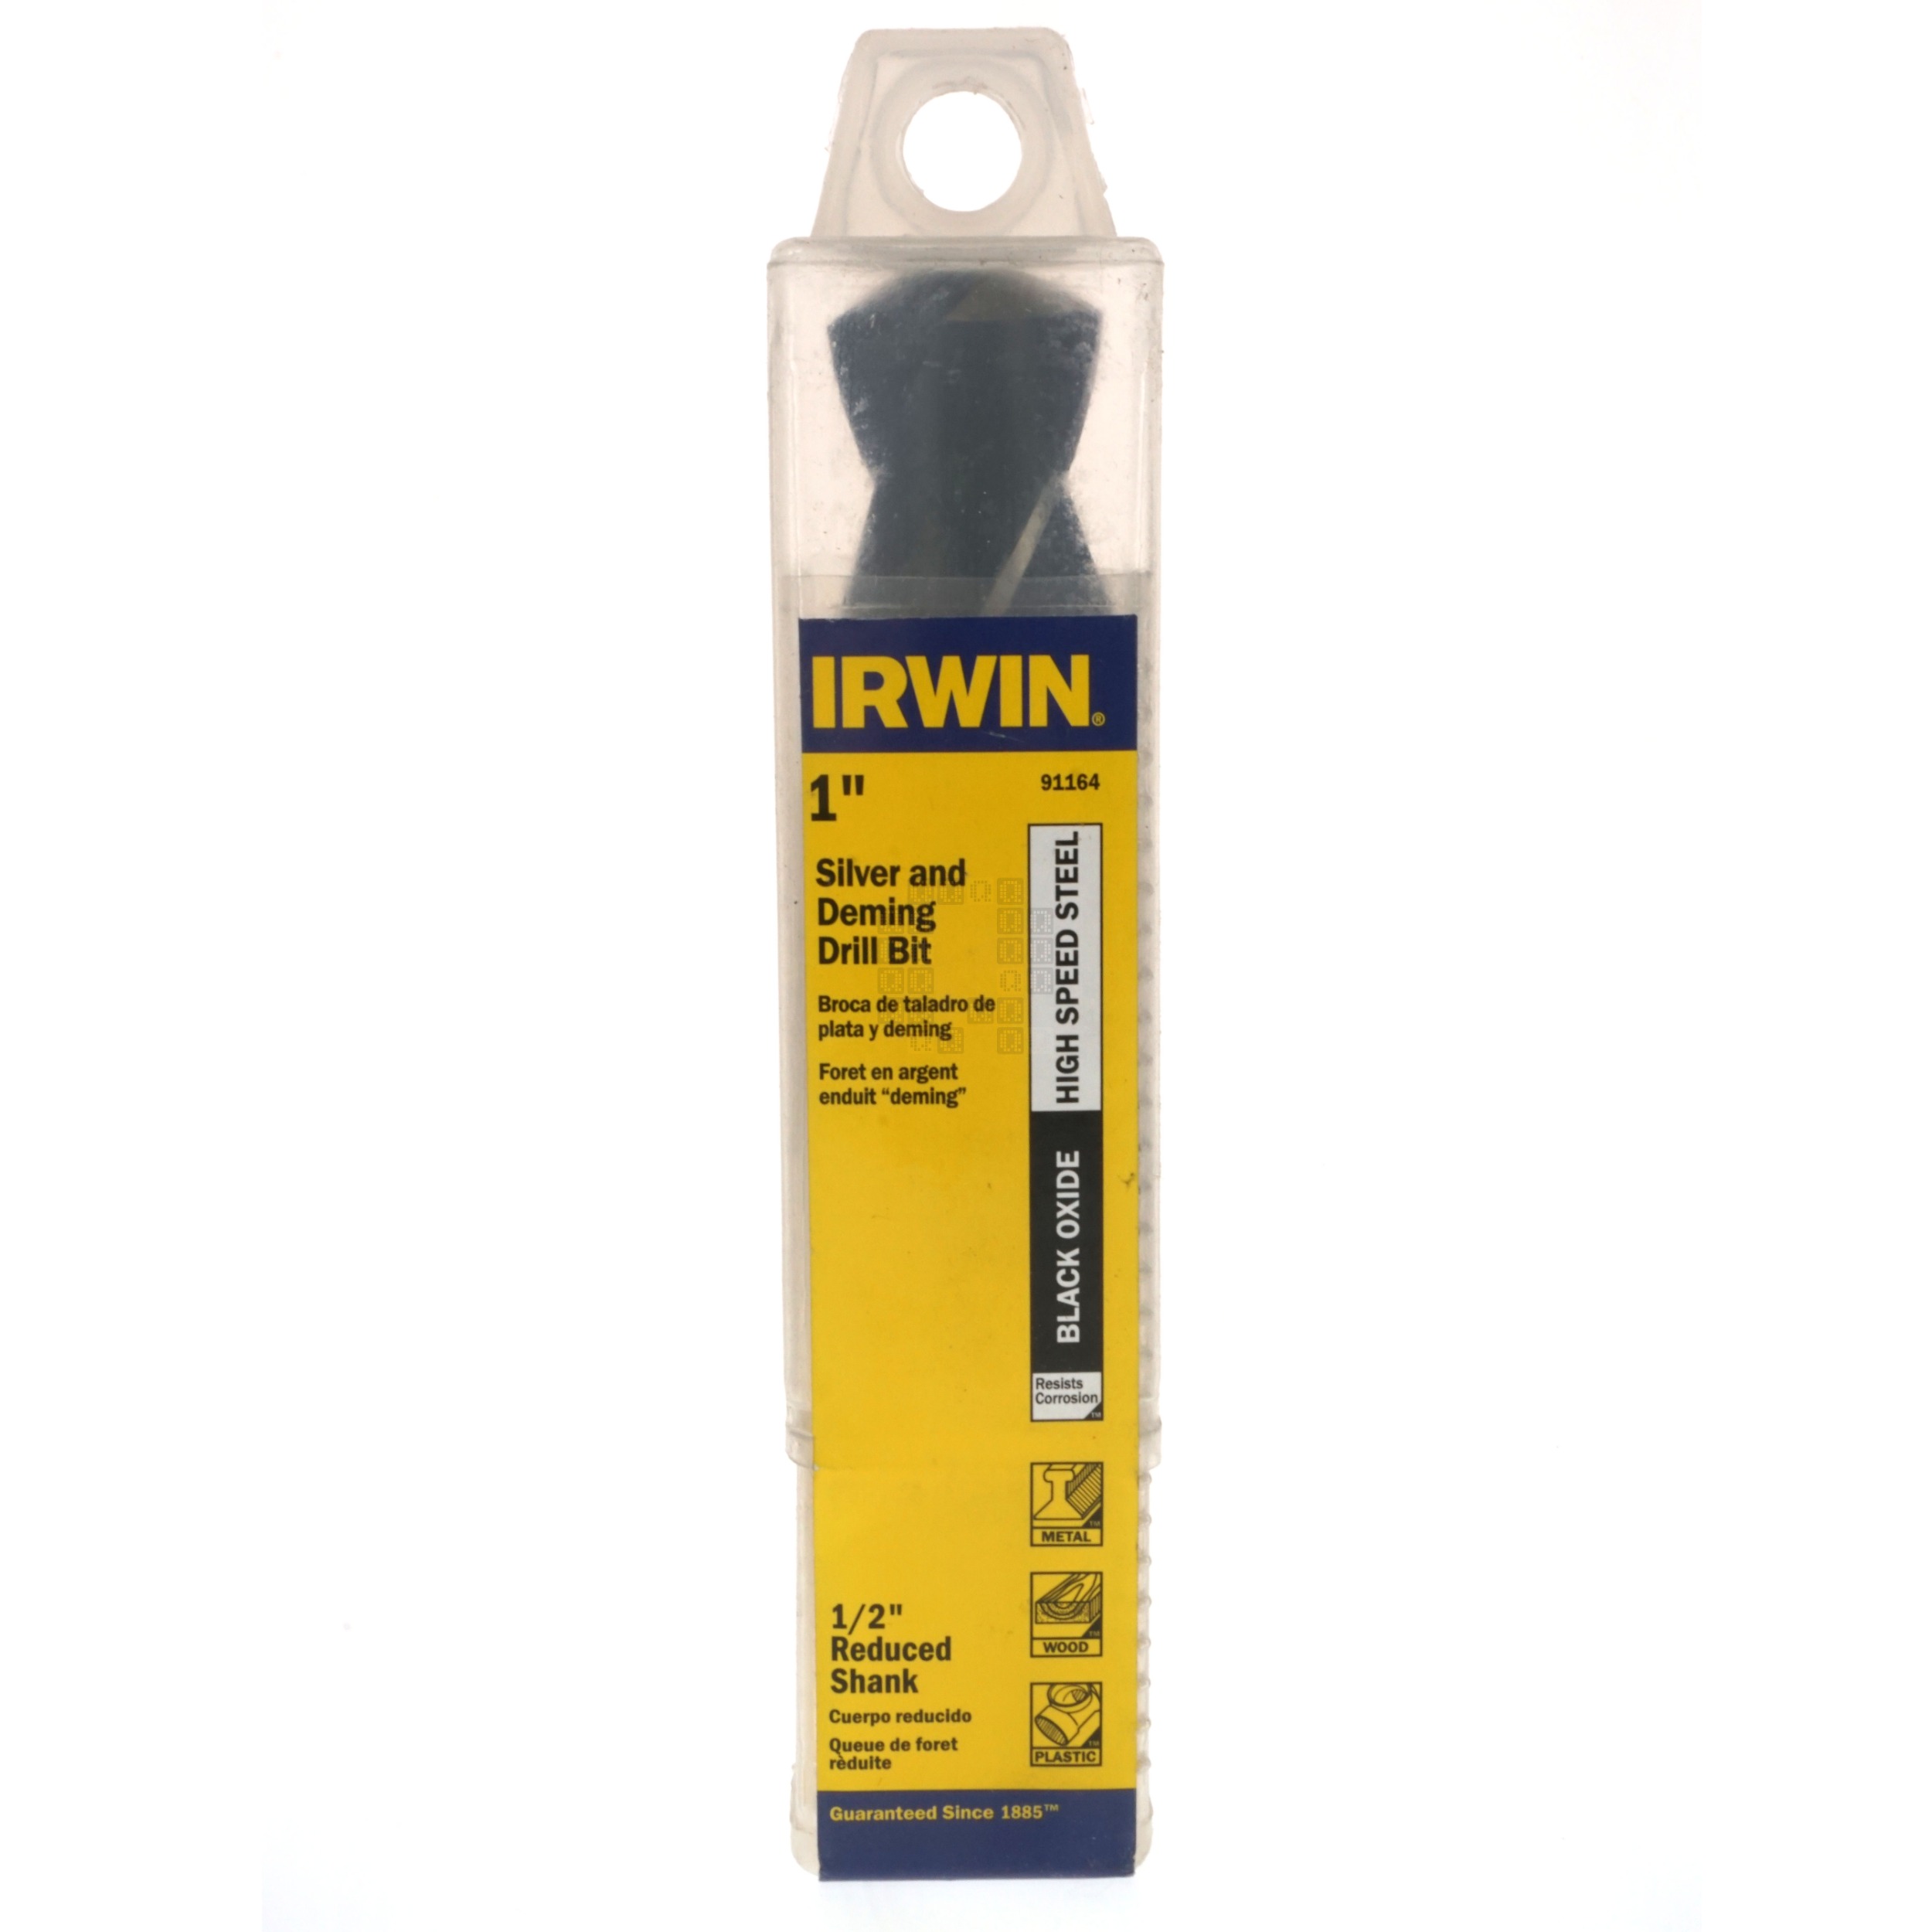 Irwin 91164 1" Silver and Deming Black Oxide HSS Drill Bit, 1/2" Reduced Shank